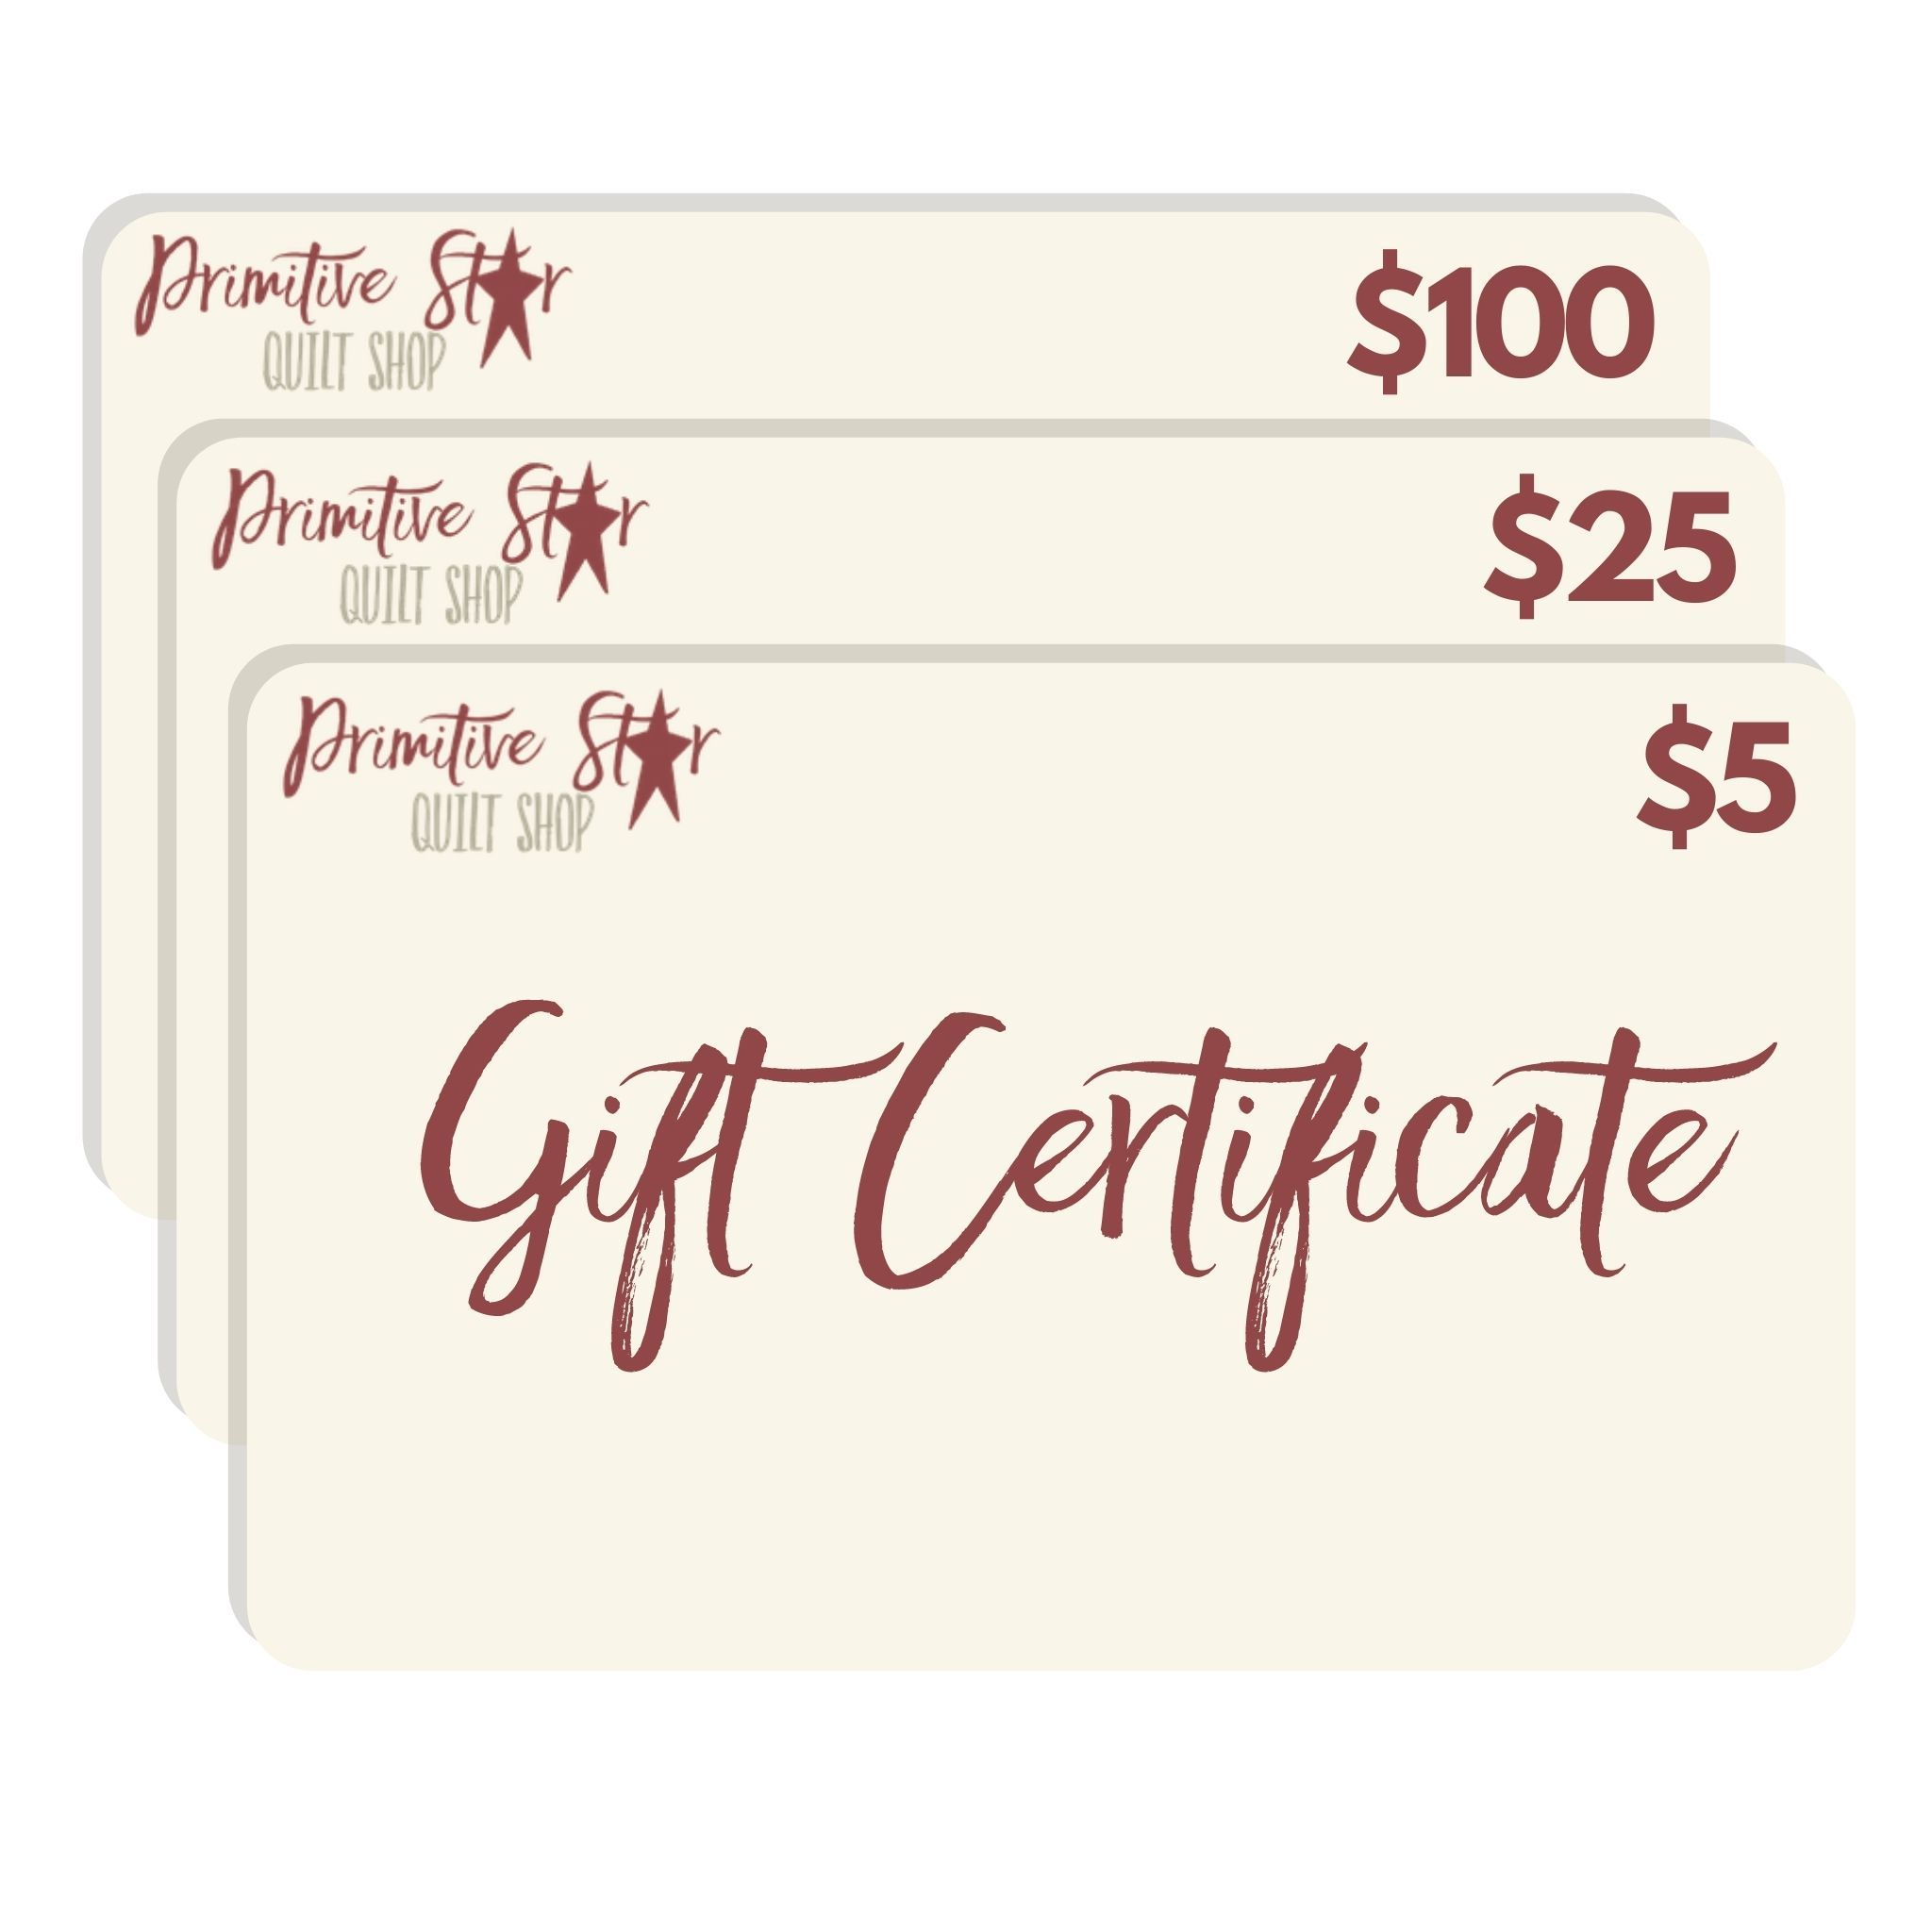 Spanx Store Gift Cards and Gift Certificate - 541 Westfarms Mall,  Farmington, CT